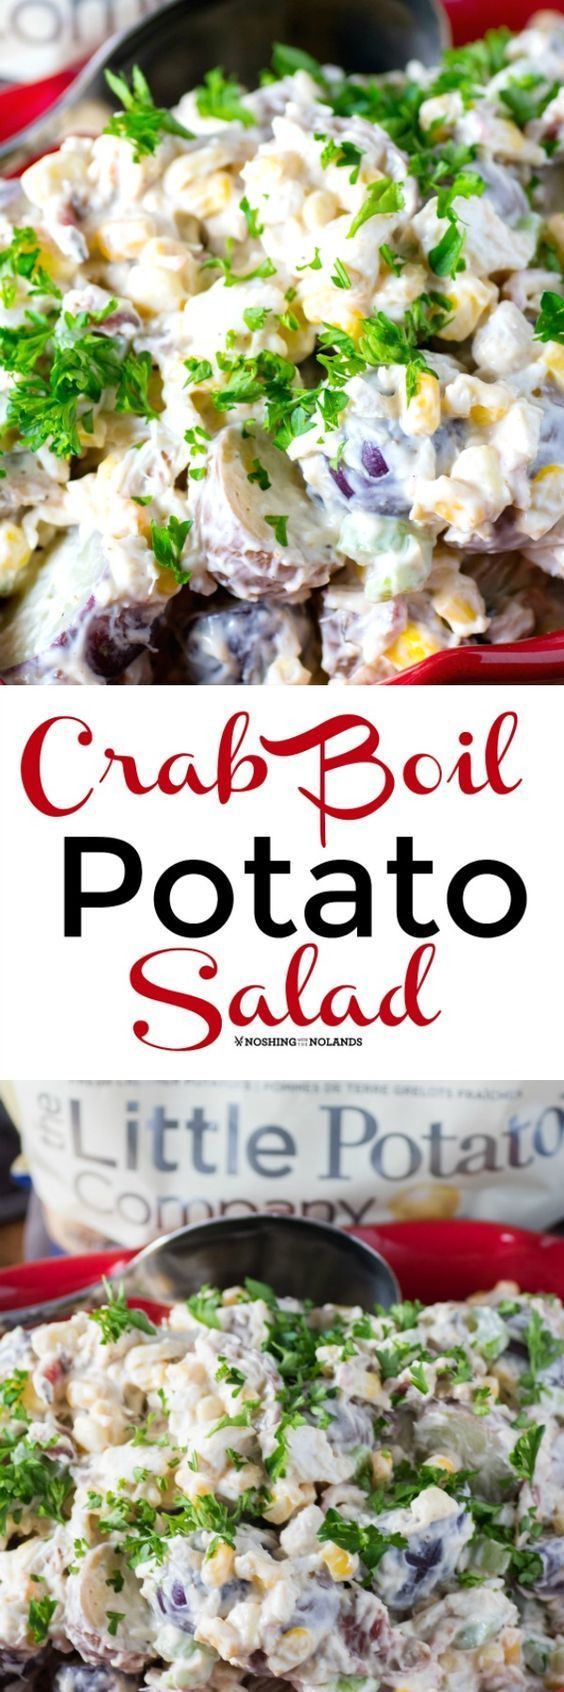 Crab Boil Side Dishes
 Crab Boil Potato Salad by Noshing With The Nolands has the